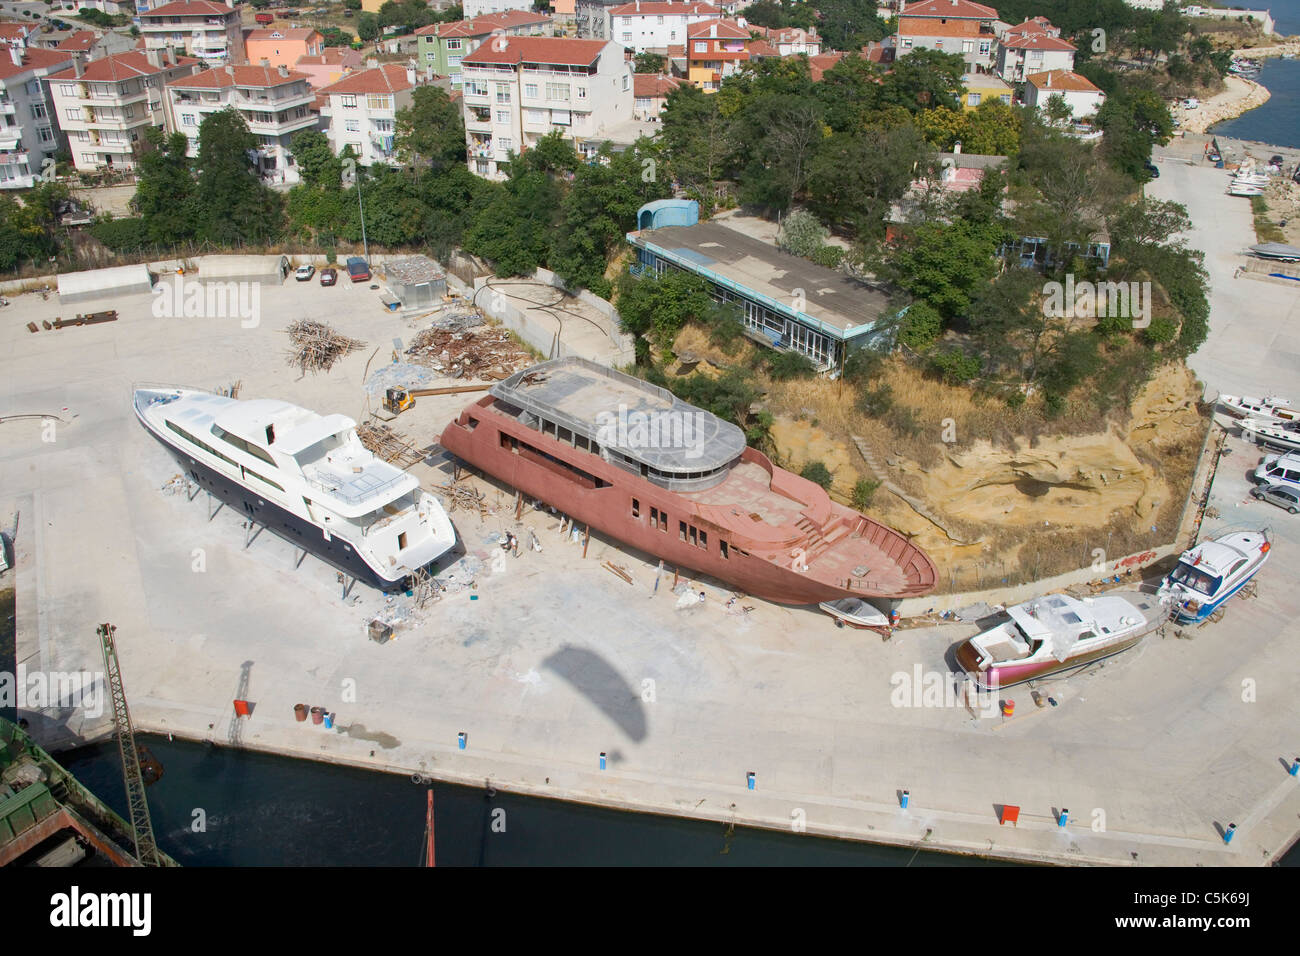 Yachts being built or repaired, aerial, Buyukcekmece, Soutwest of Istanbul, Turkey Stock Photo